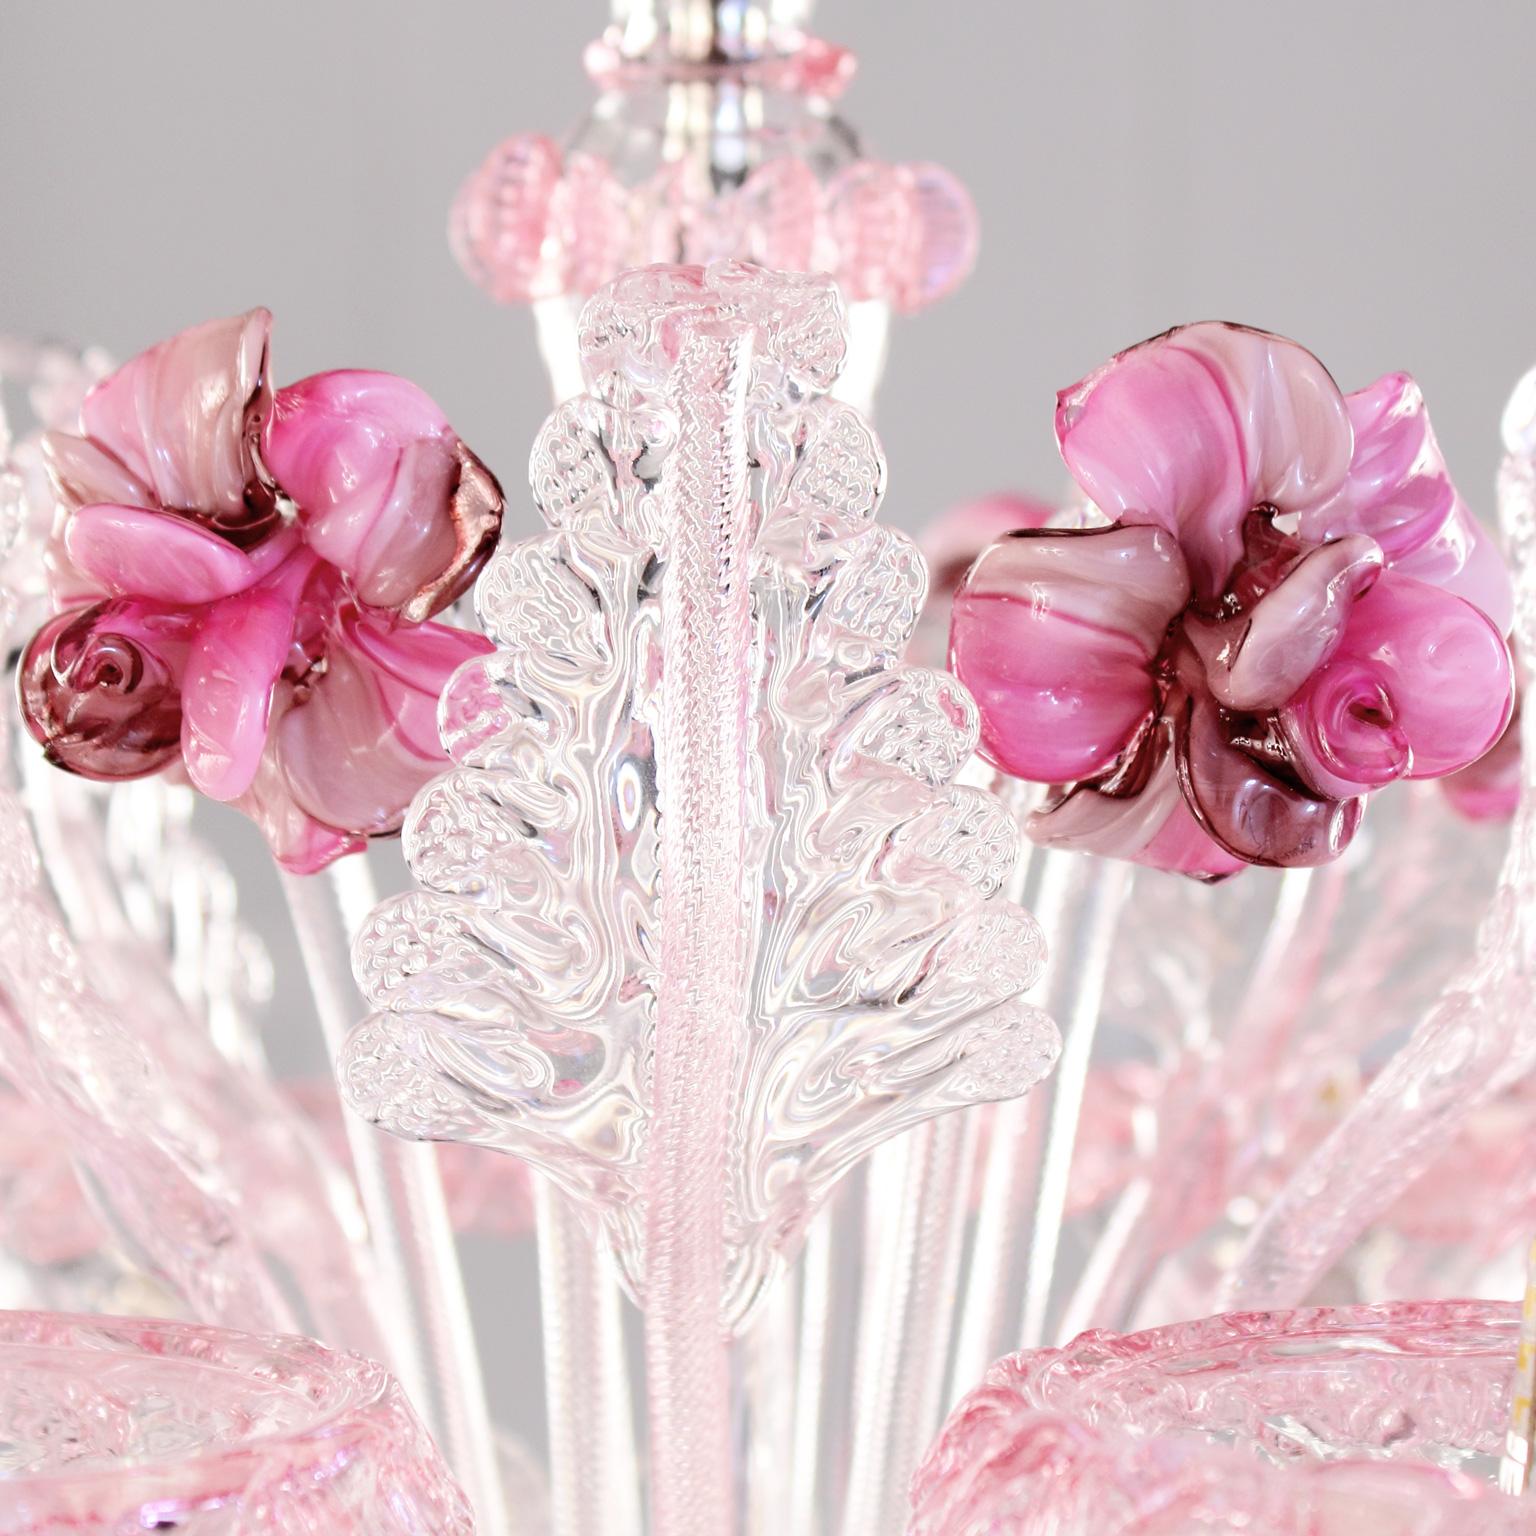 Galliano chandelier, 6-light, crystal, pink Murano glass by Multiforme.
This artistic glass chandelier has 6-light, is handmade in crystal and pink glass with polychrome vitreous paste glass flowers.
Galliano is our tribute to the authentic Murano